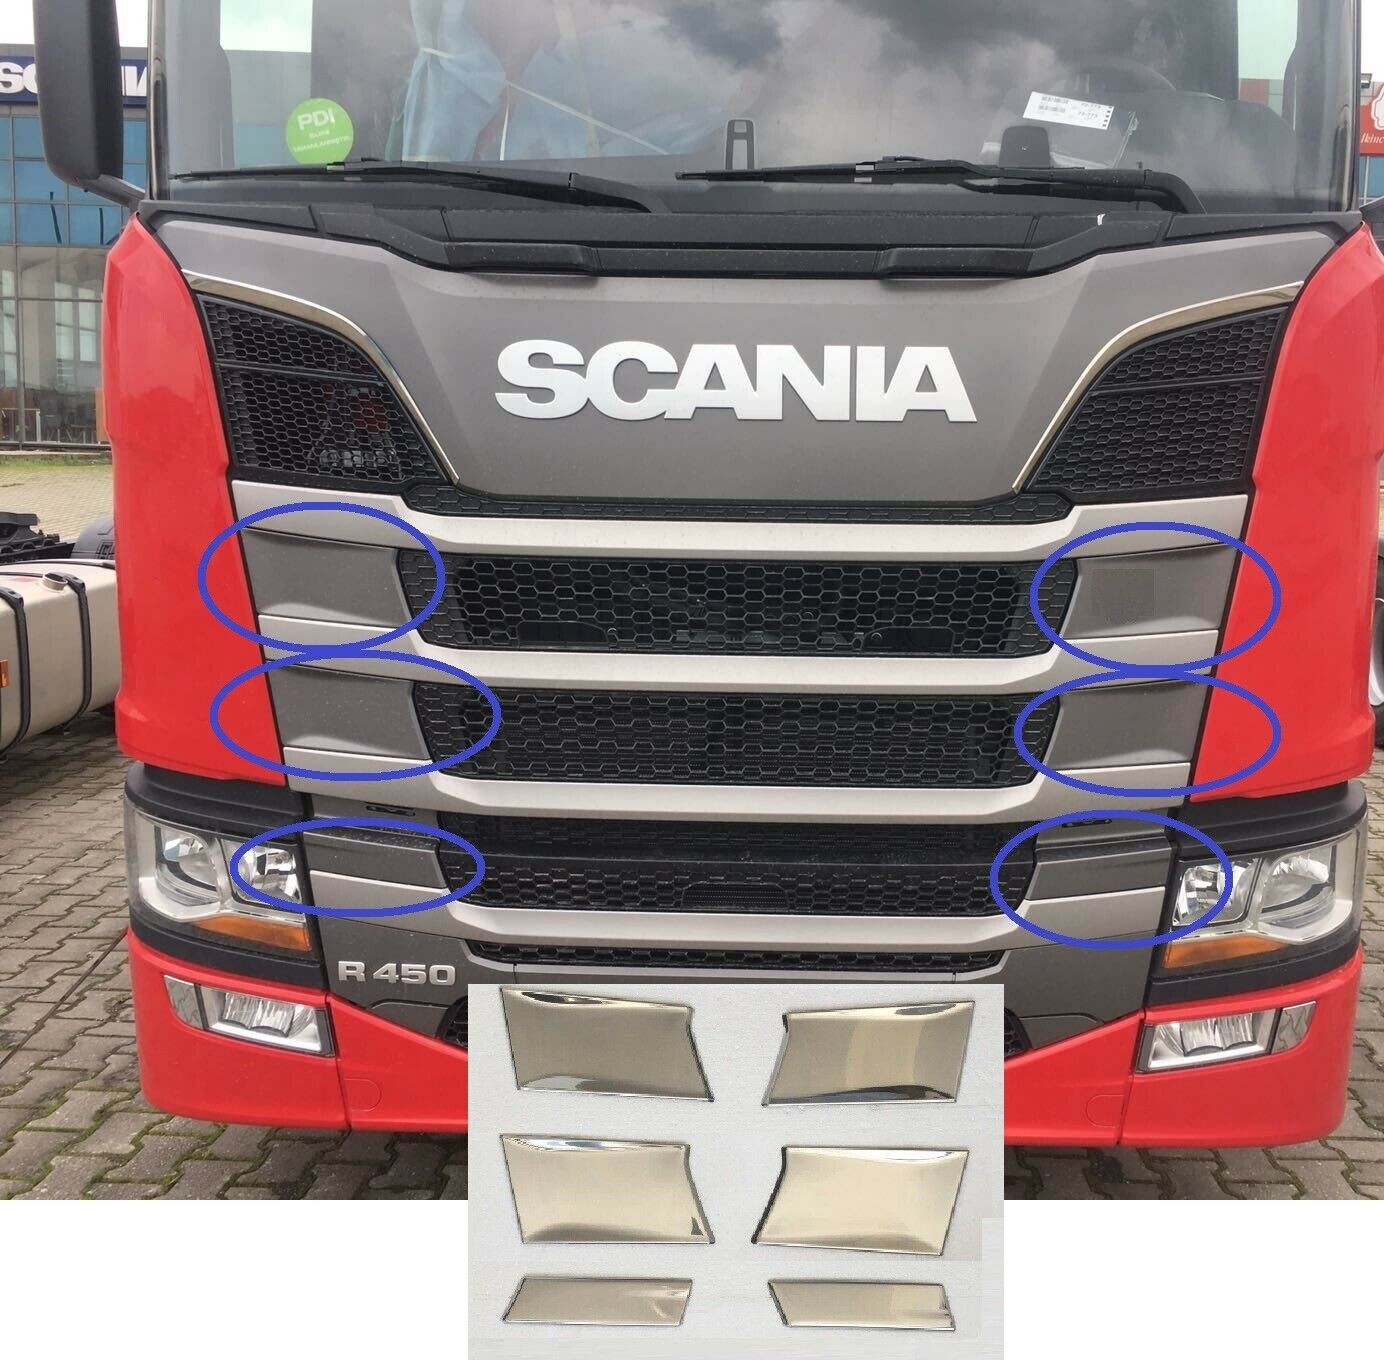 SCANIA R450 CHROME GRILL EDGE 6 Pcs. STAINLESS STEEL